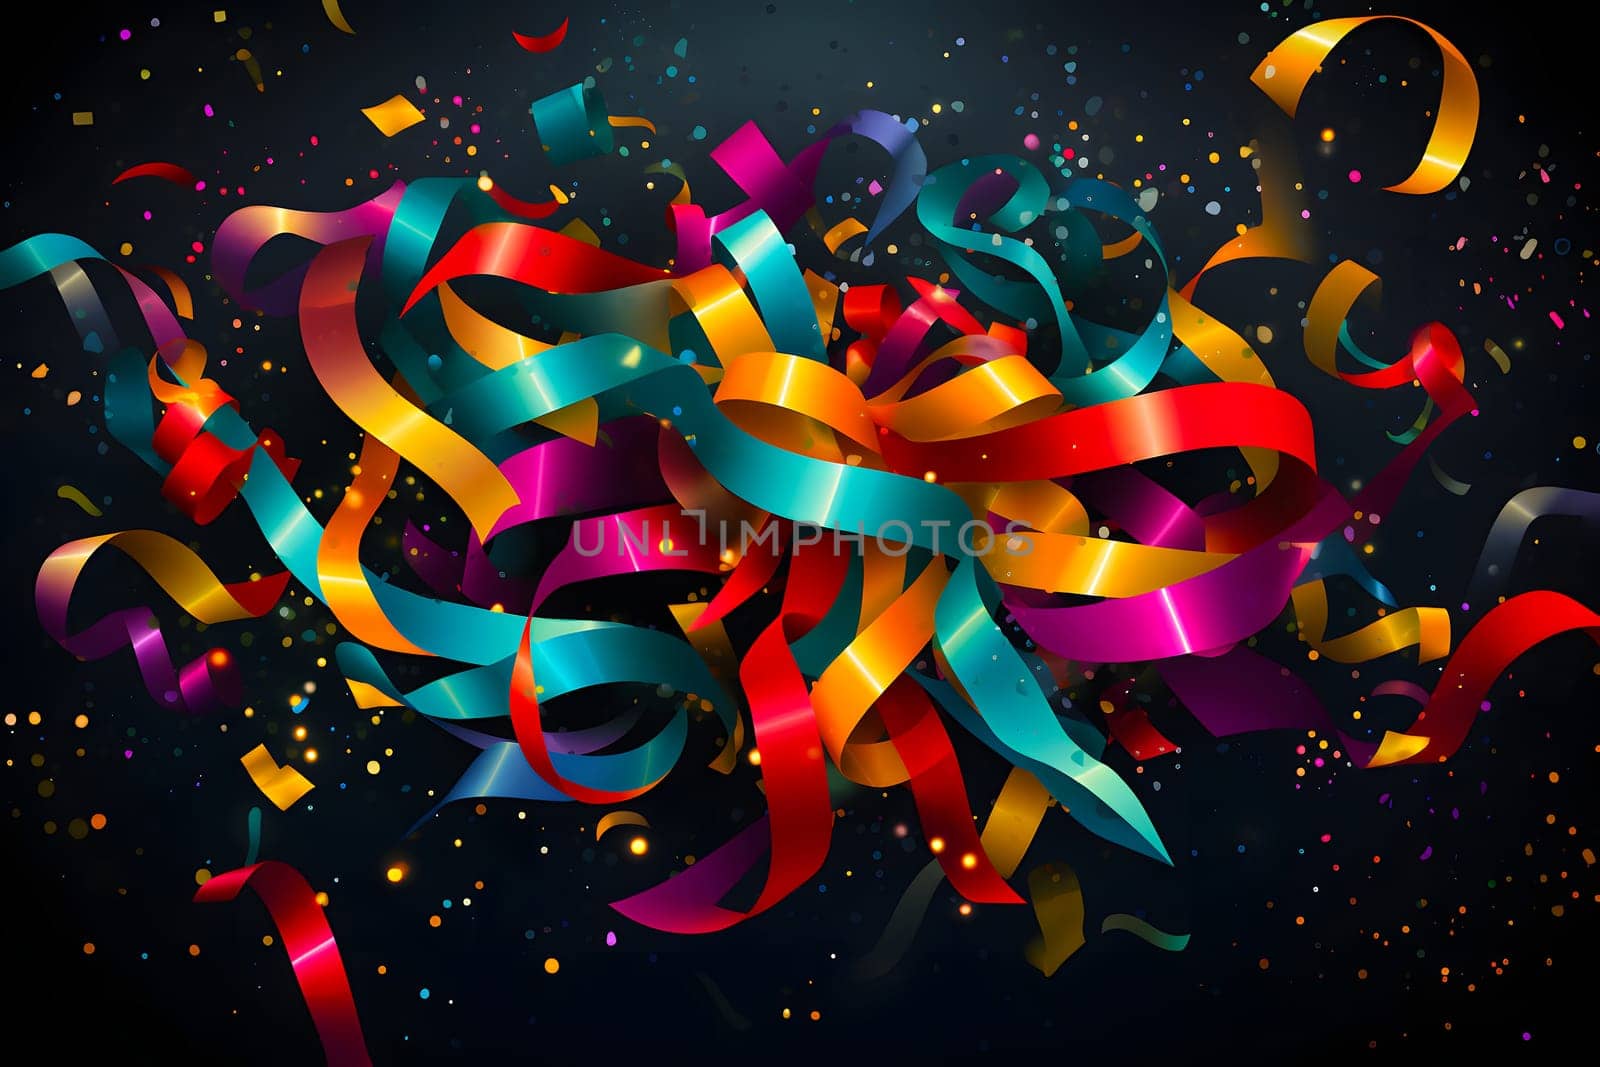 colored ribbons on dark background, neural network generated image by z1b